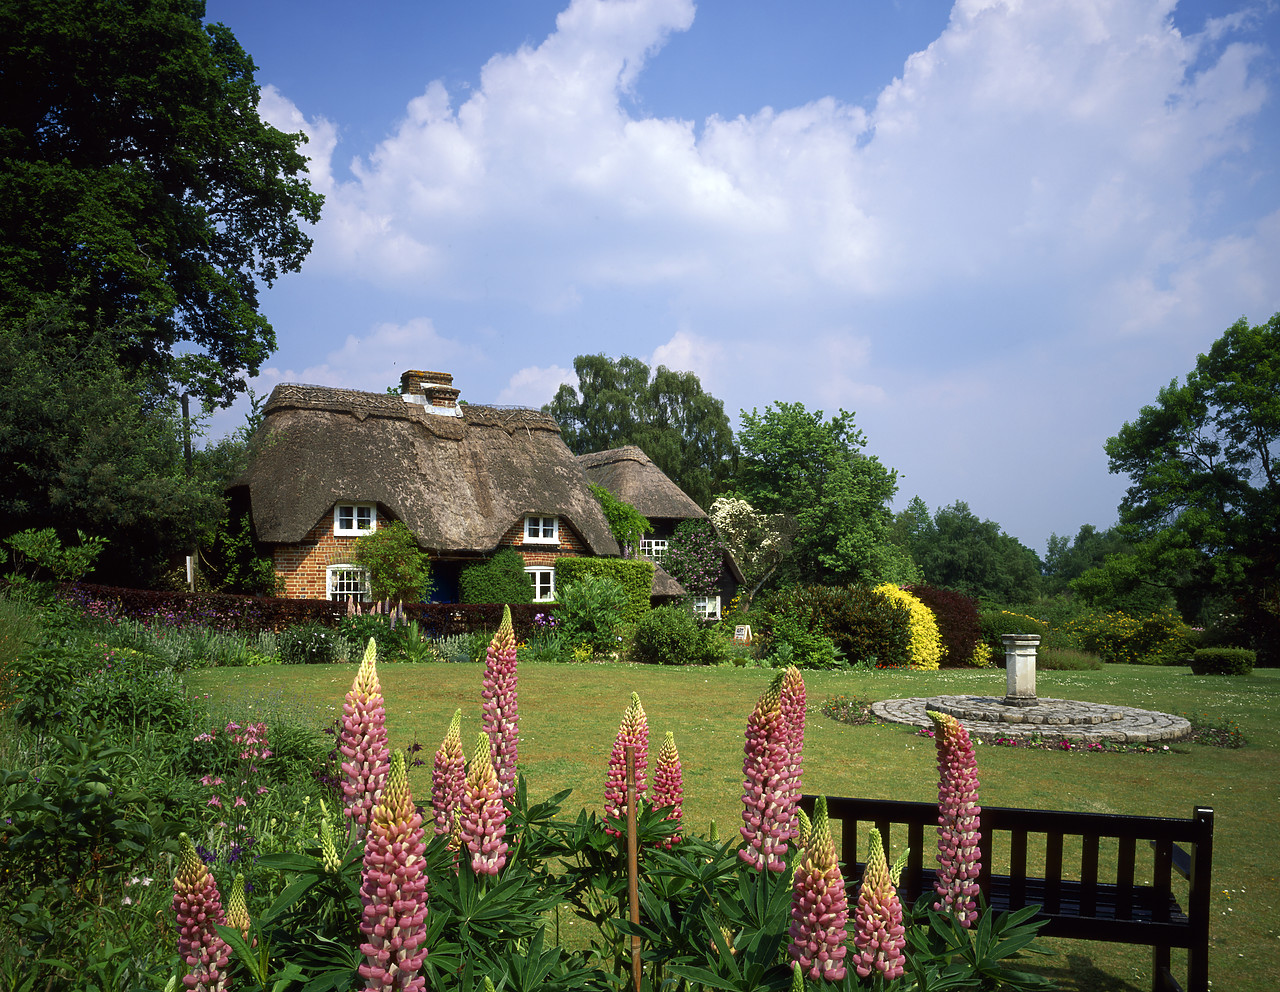 #980695-1 - Thatched Cottage & Lupins, Minstead, Hampshire, England